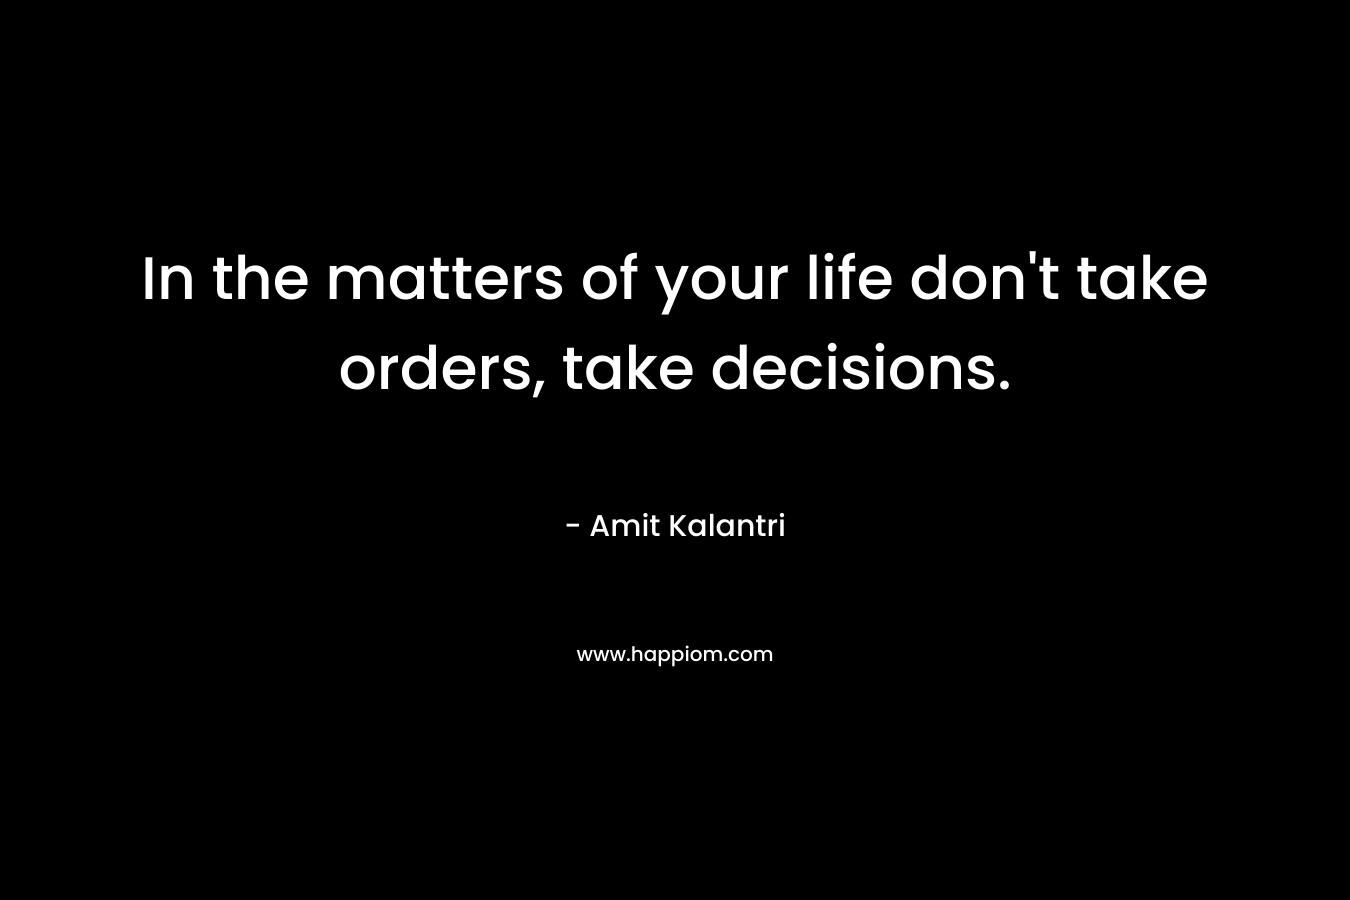 In the matters of your life don’t take orders, take decisions. – Amit Kalantri